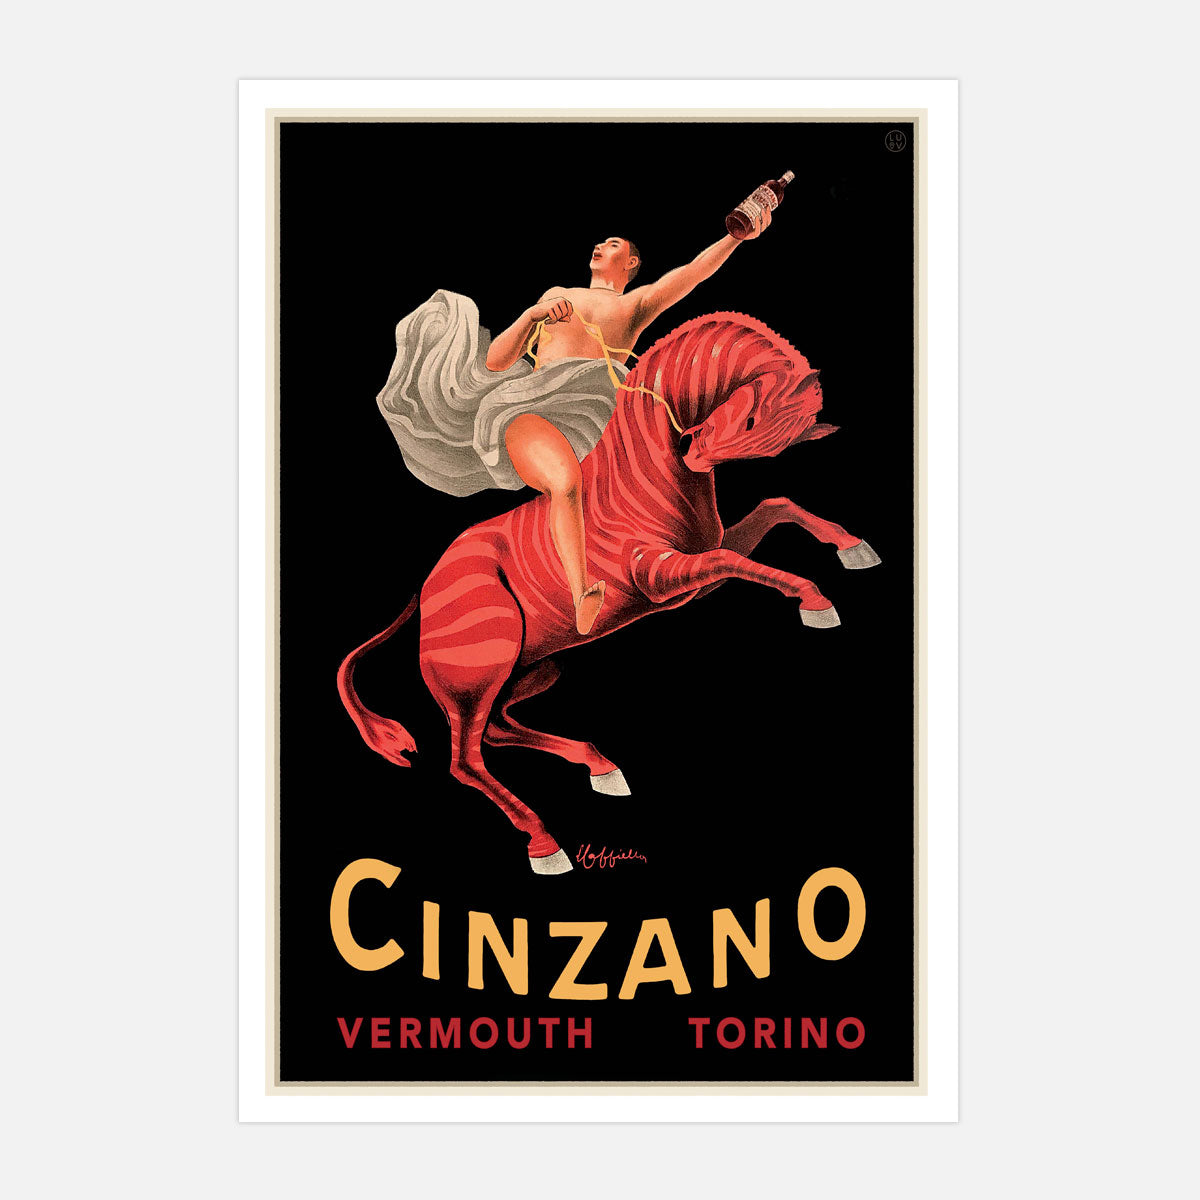 Cinzano Vermouth vintage advertising poster print from Places We Luv